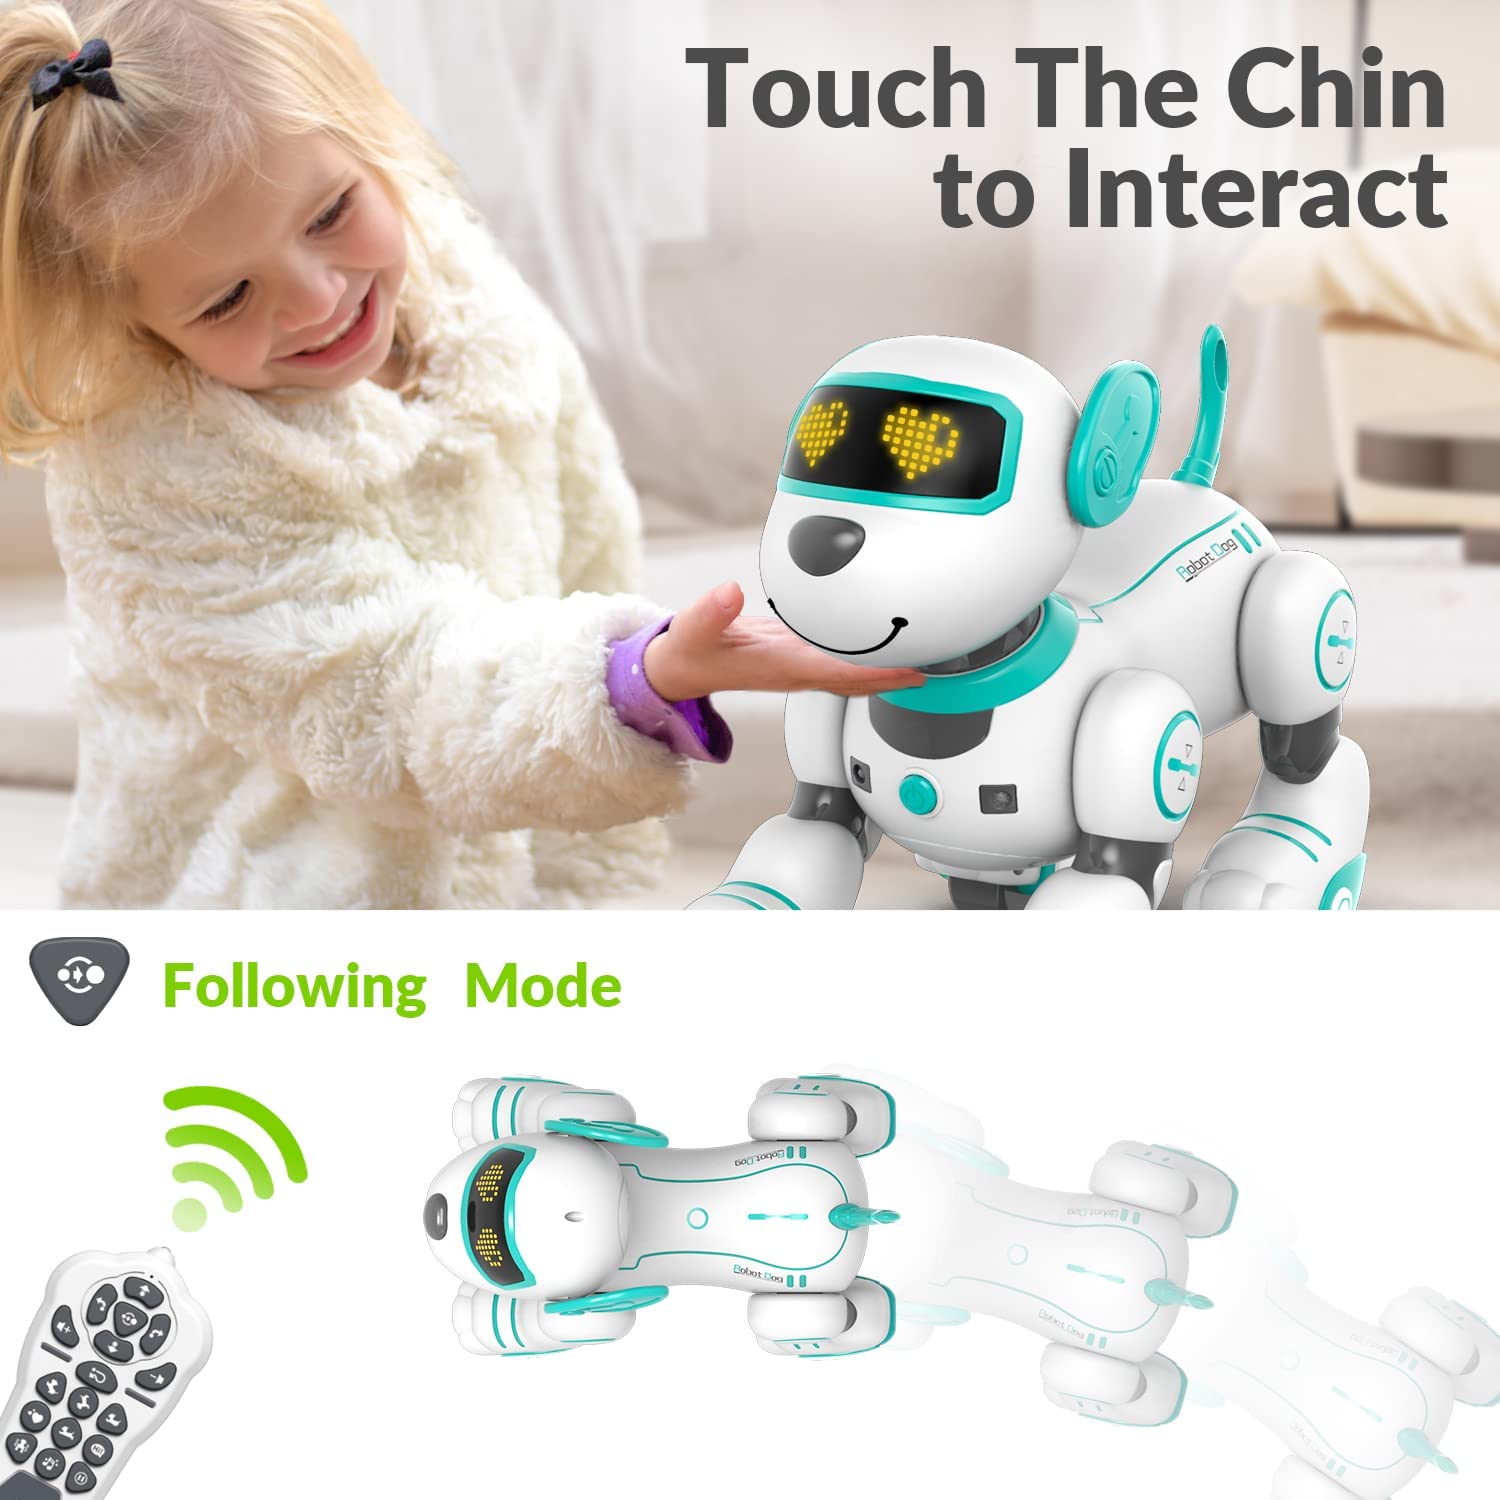 Robot Dog Toy For Kids, Remote Control Robot Toy Dog And